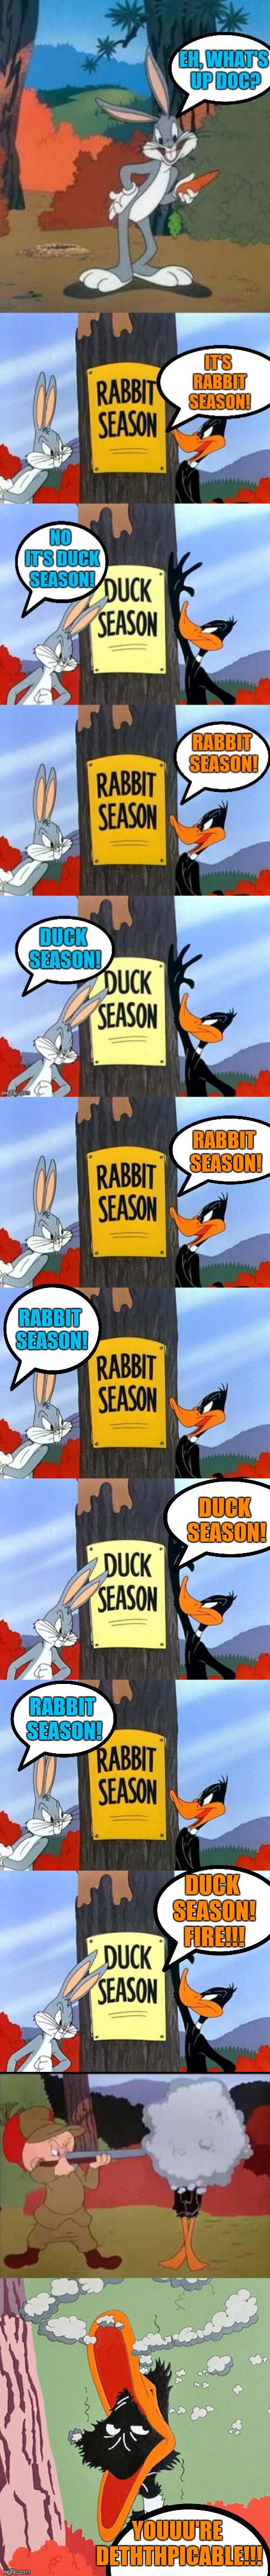 Bird Weekend February 1-3, a moemeobro, claybourne, and 1forpiece event | RABBIT SEASON! RABBIT SEASON! DUCK SEASON! RABBIT SEASON! DUCK SEASON! FIRE!!! YOUUU'RE DETHTHPICABLE!!! | image tagged in memes,funny,bird weekend,daffy duck,bugs bunny,looney tunes | made w/ Imgflip meme maker